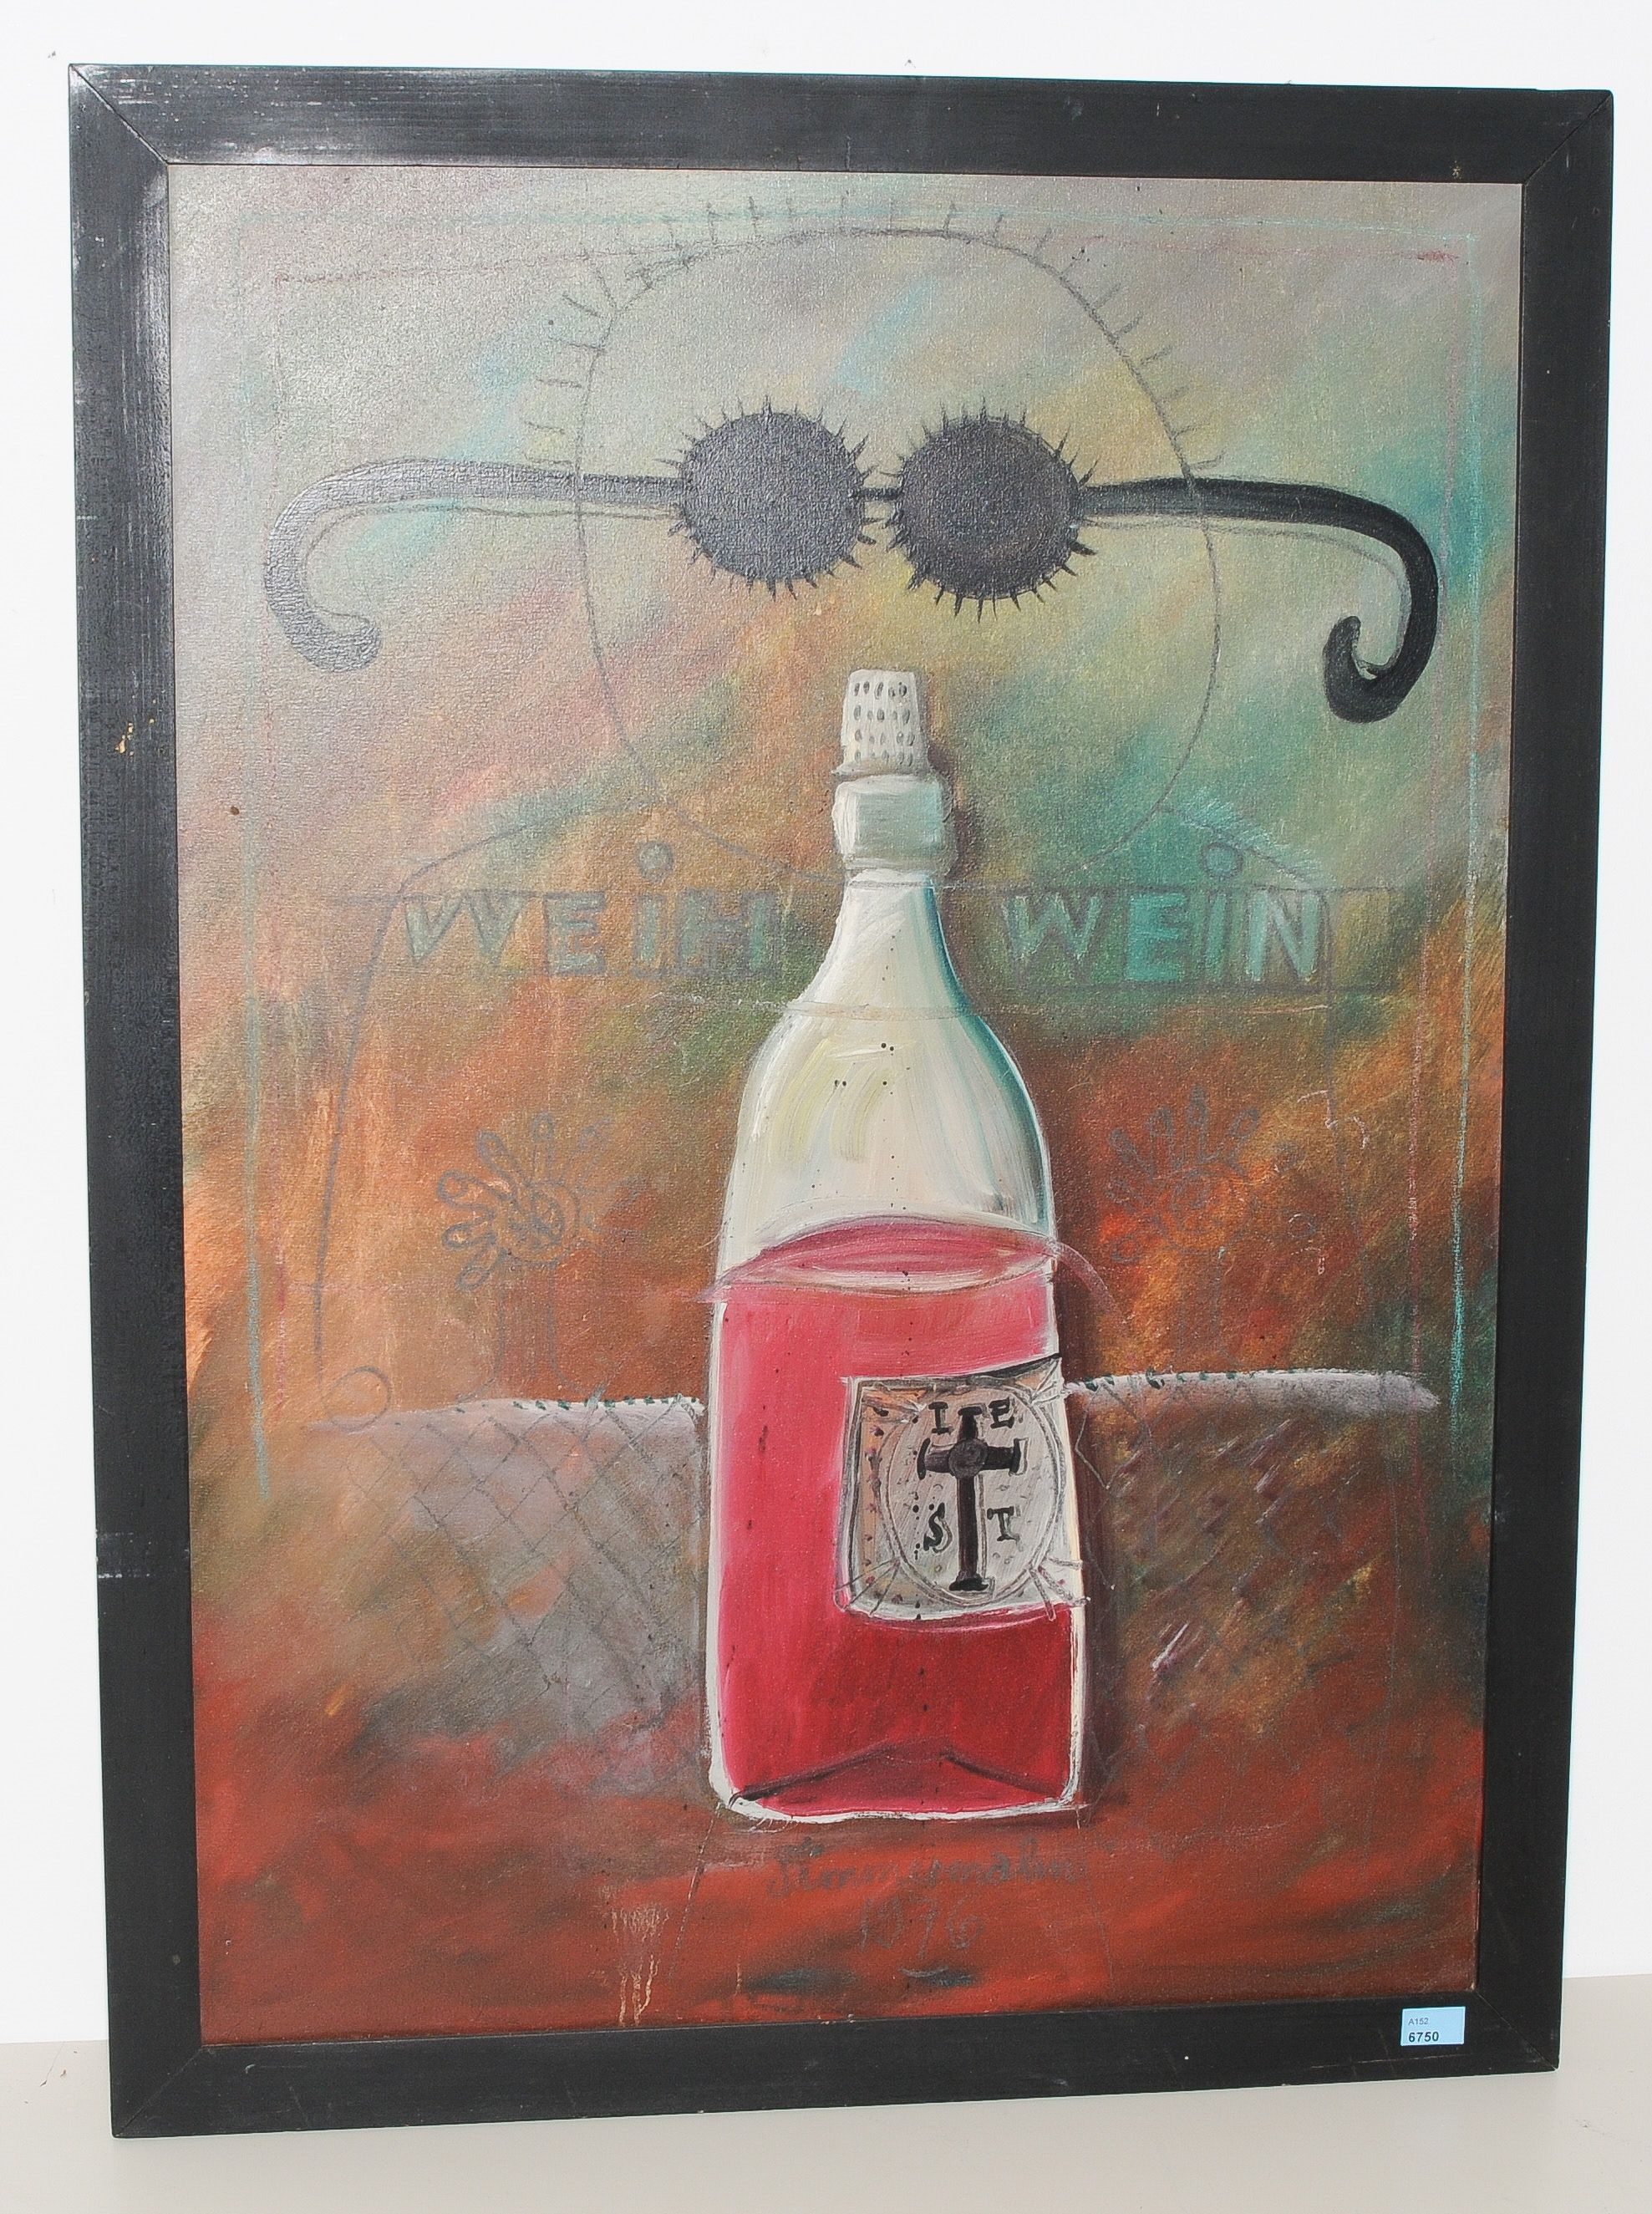 Artwork by Peter Timmermahn, Weih Wein, Made of Oil on canvas